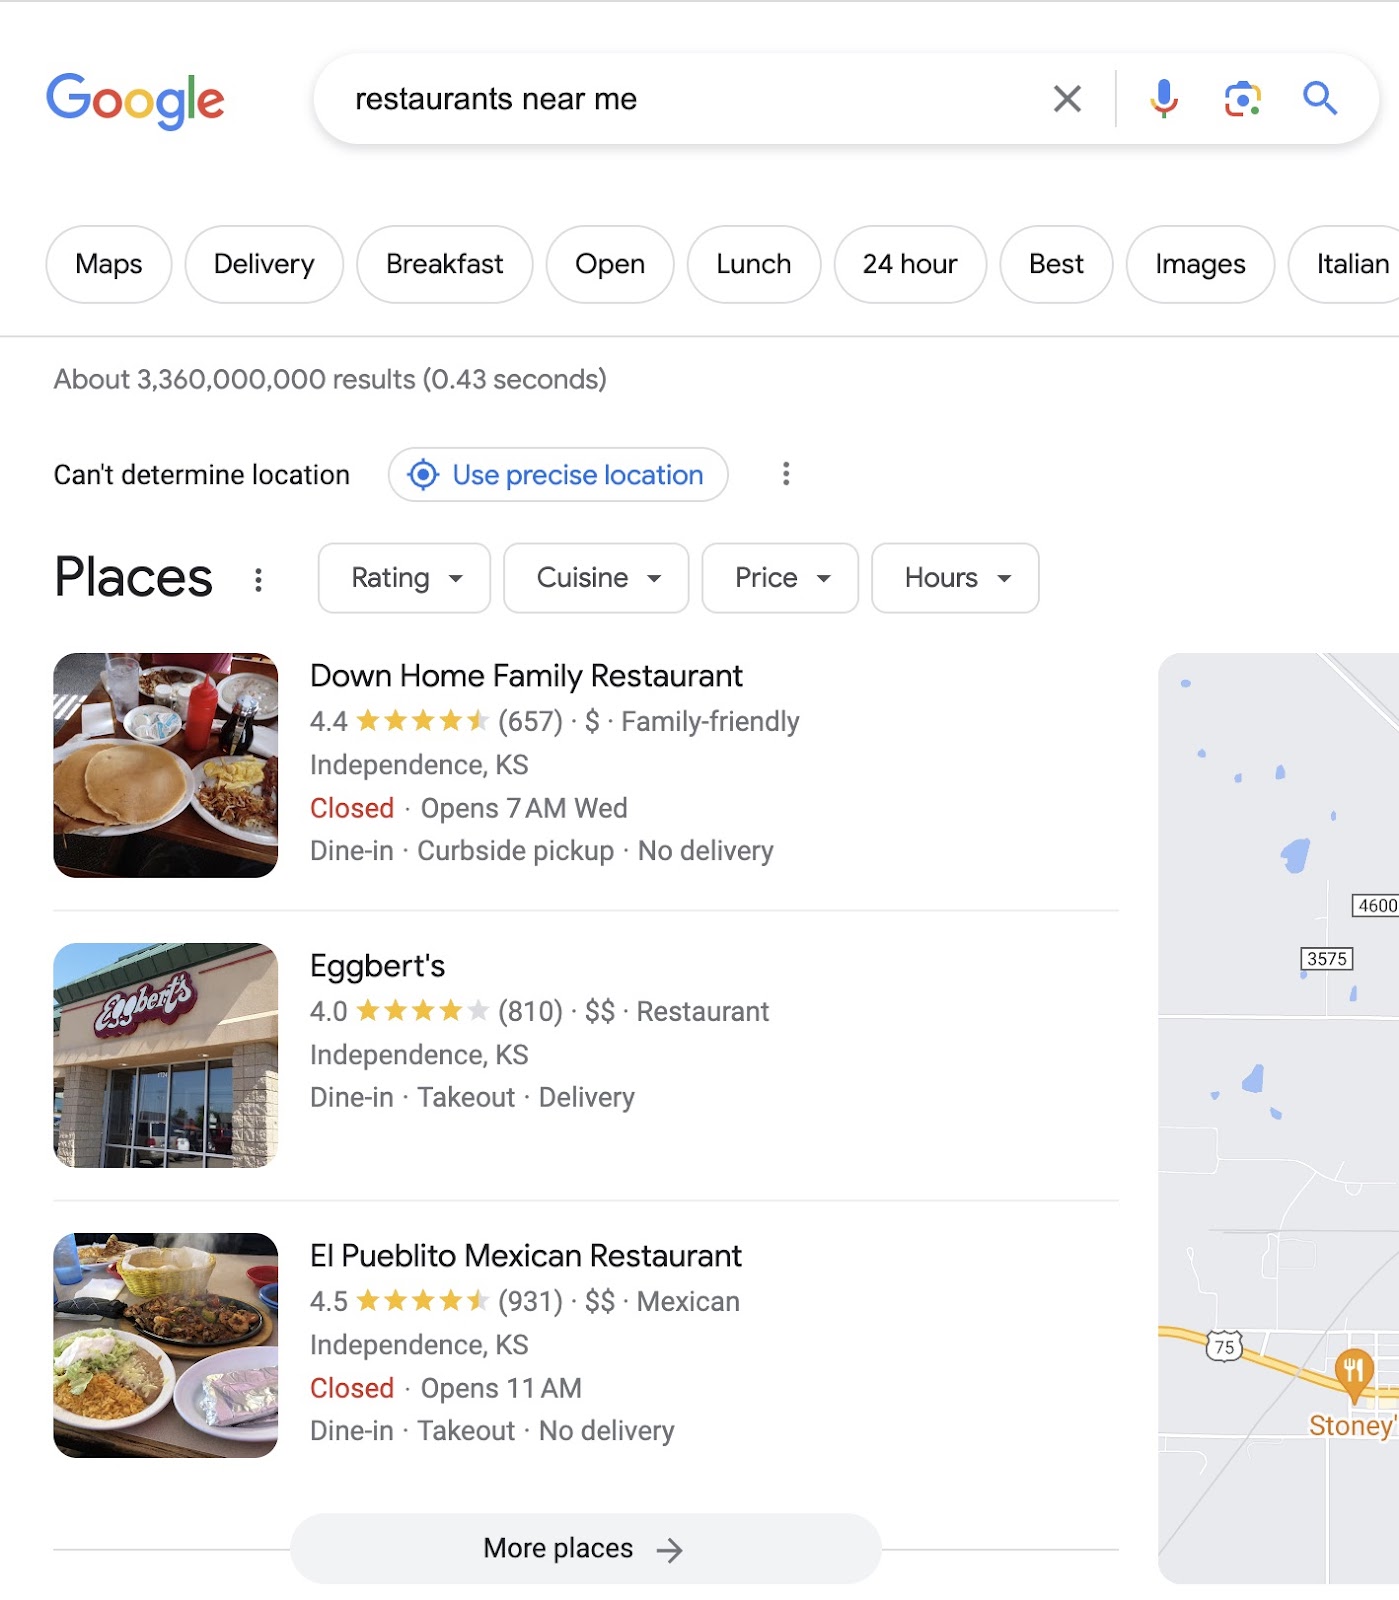 Google's local pack results for "restaurants near me" query